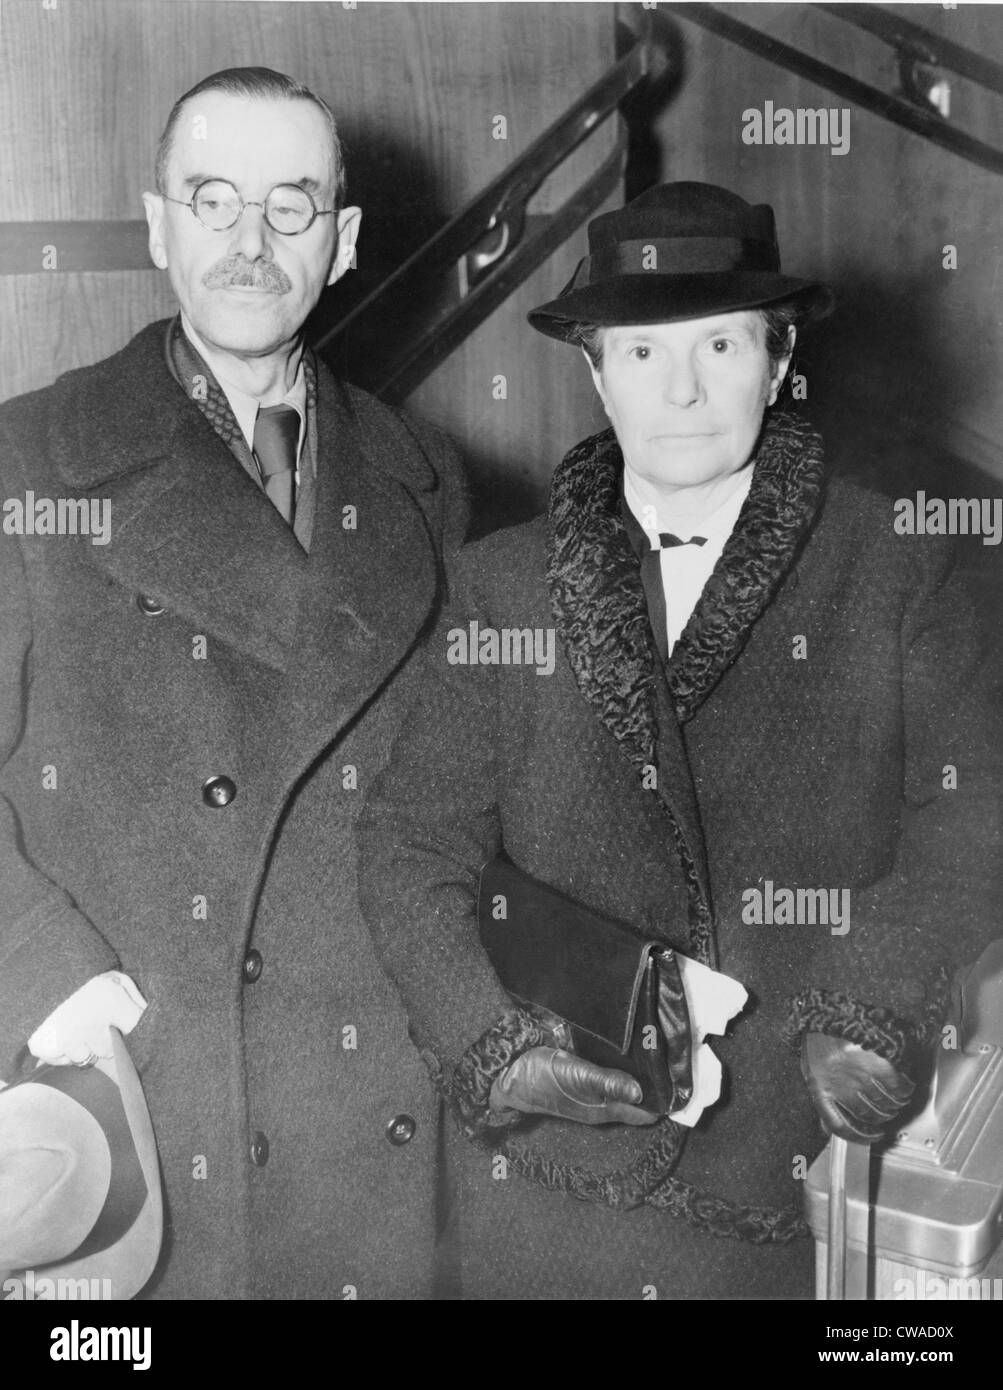 Thomas Mann (1875-1955) and wife, Katia, in 1938, as they arrived to spend the WWII years in exile in Princeton, NJ. Thomas Stock Photo